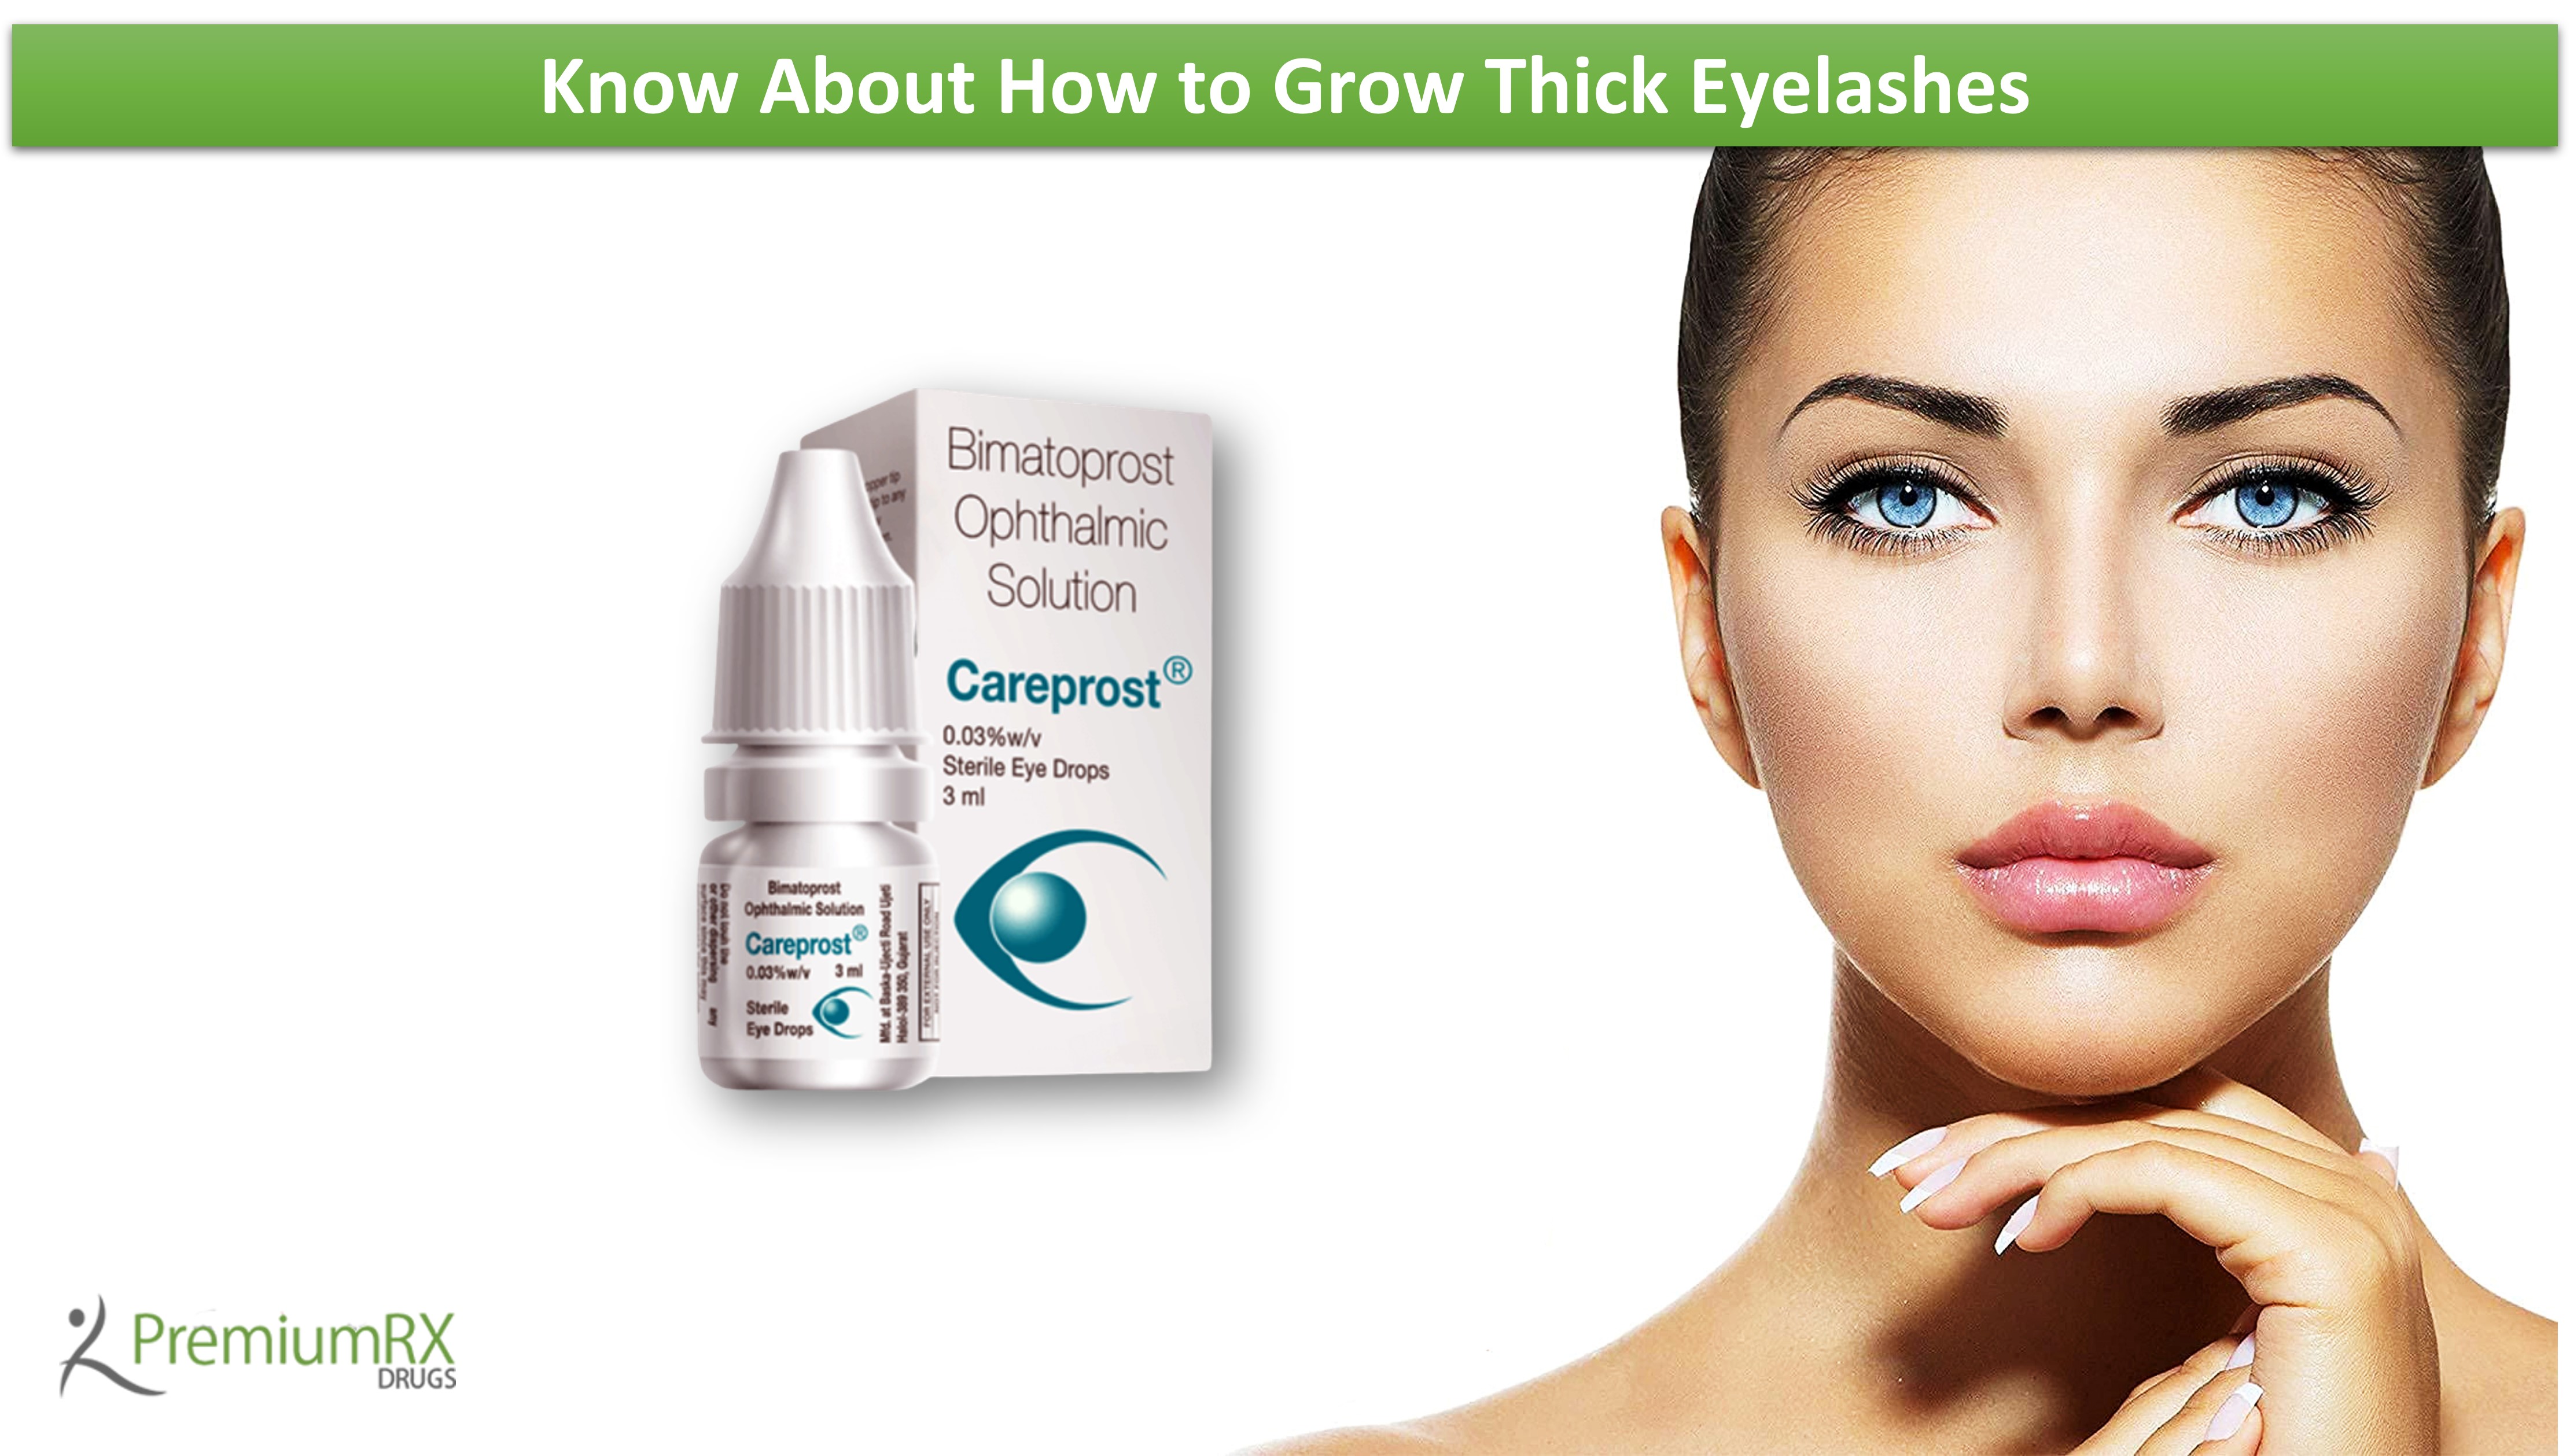 Know About How to Grow Thick Eyelashes